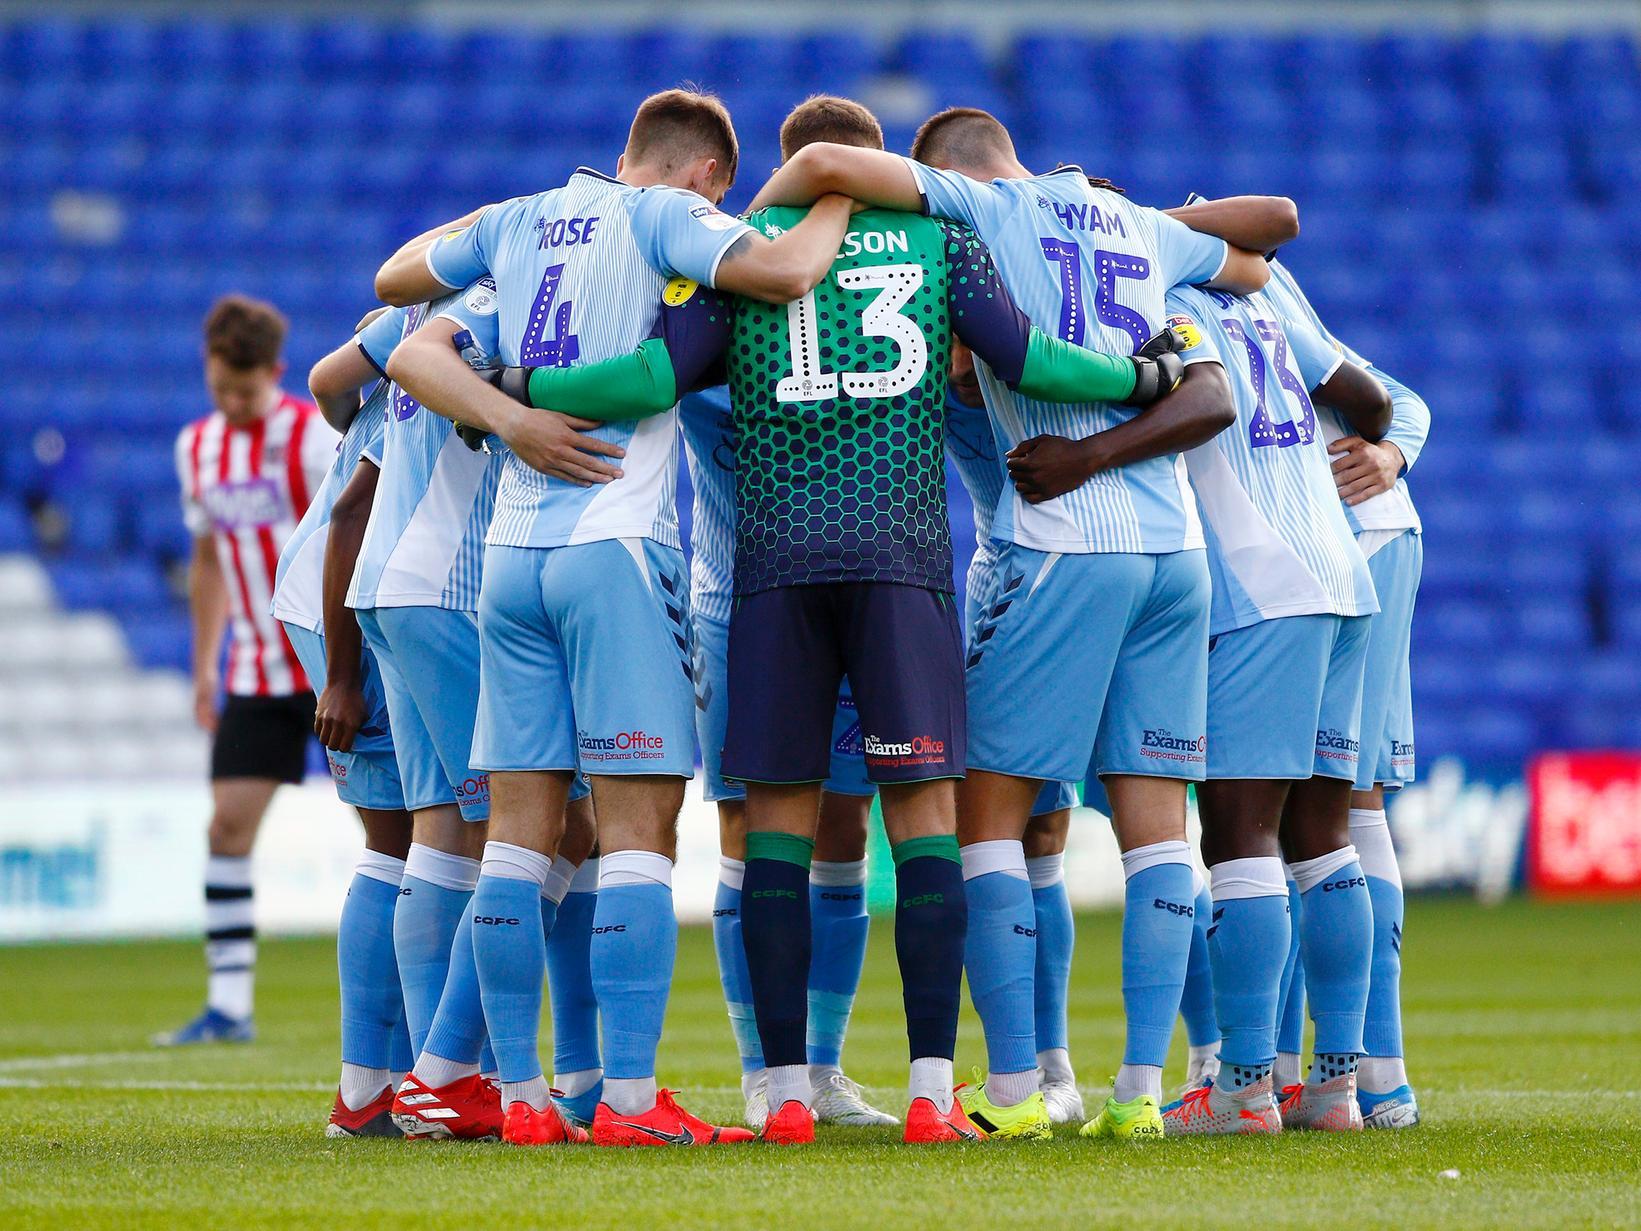 Despite riding high in third place, the bookmakers don't seem to fancy Coventry City at the moment, who have a pretty tough run of matches on the horizon.